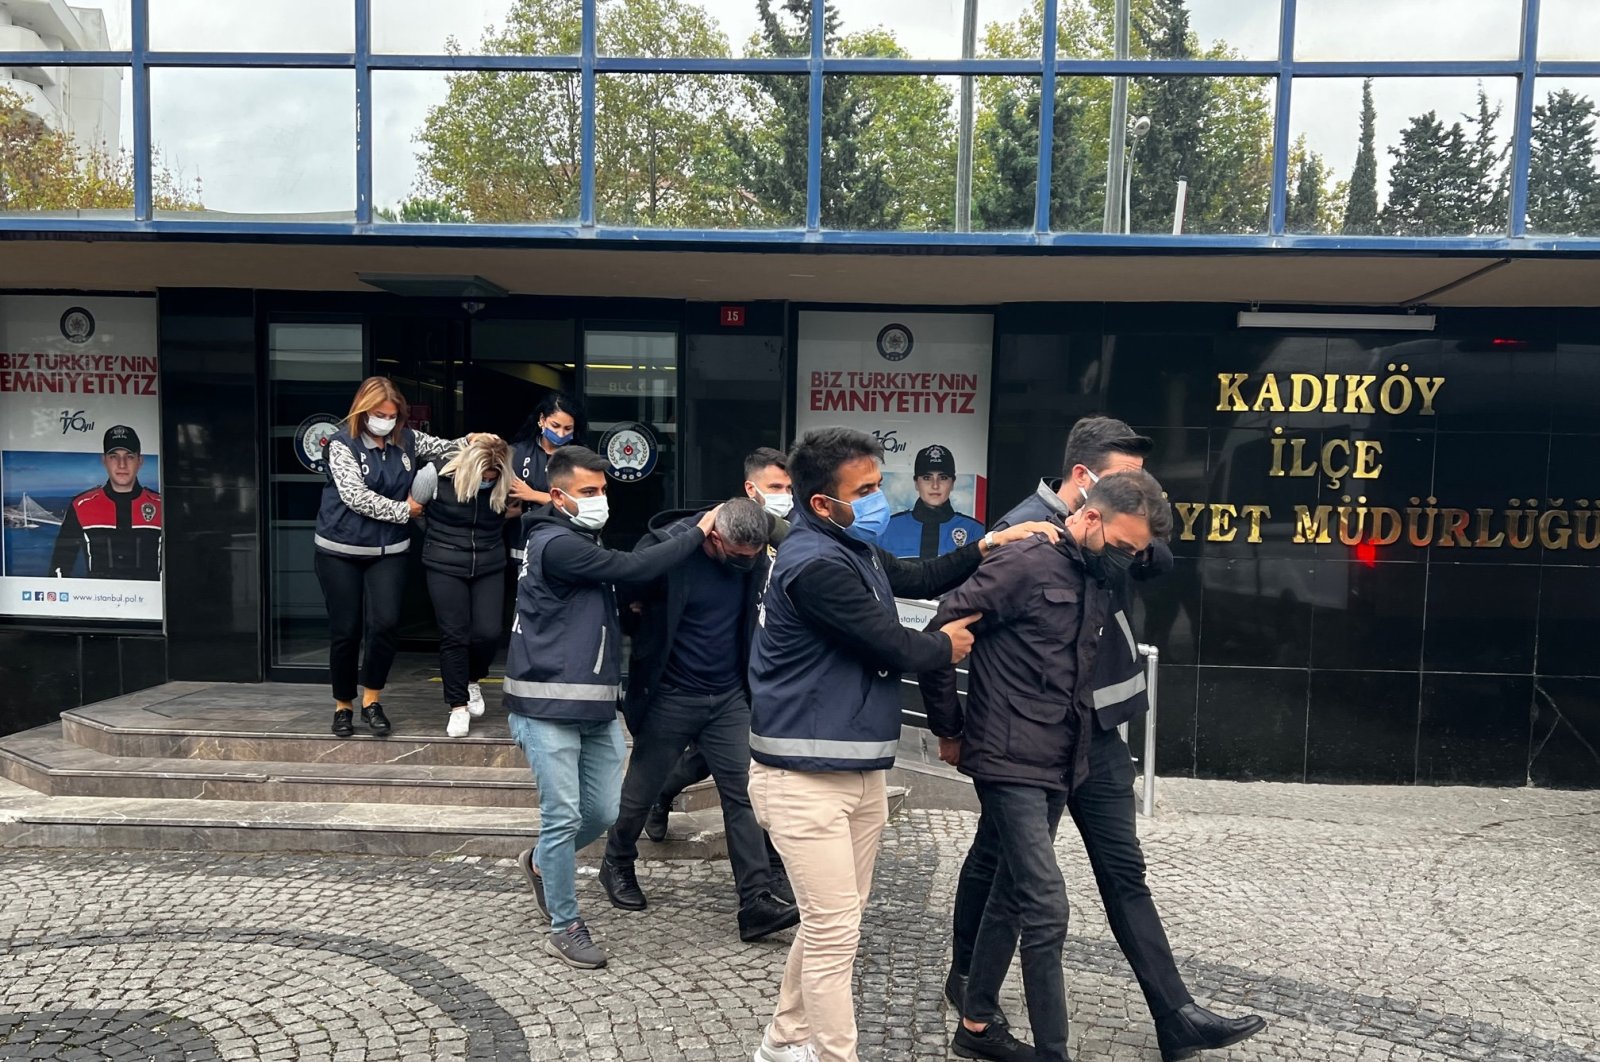 Police accompany suspects in a murder to a van for transfer to the court, in Kadıköy district, in Istanbul, Turkey, Oct. 22, 2021. (DHA PHOTO) 